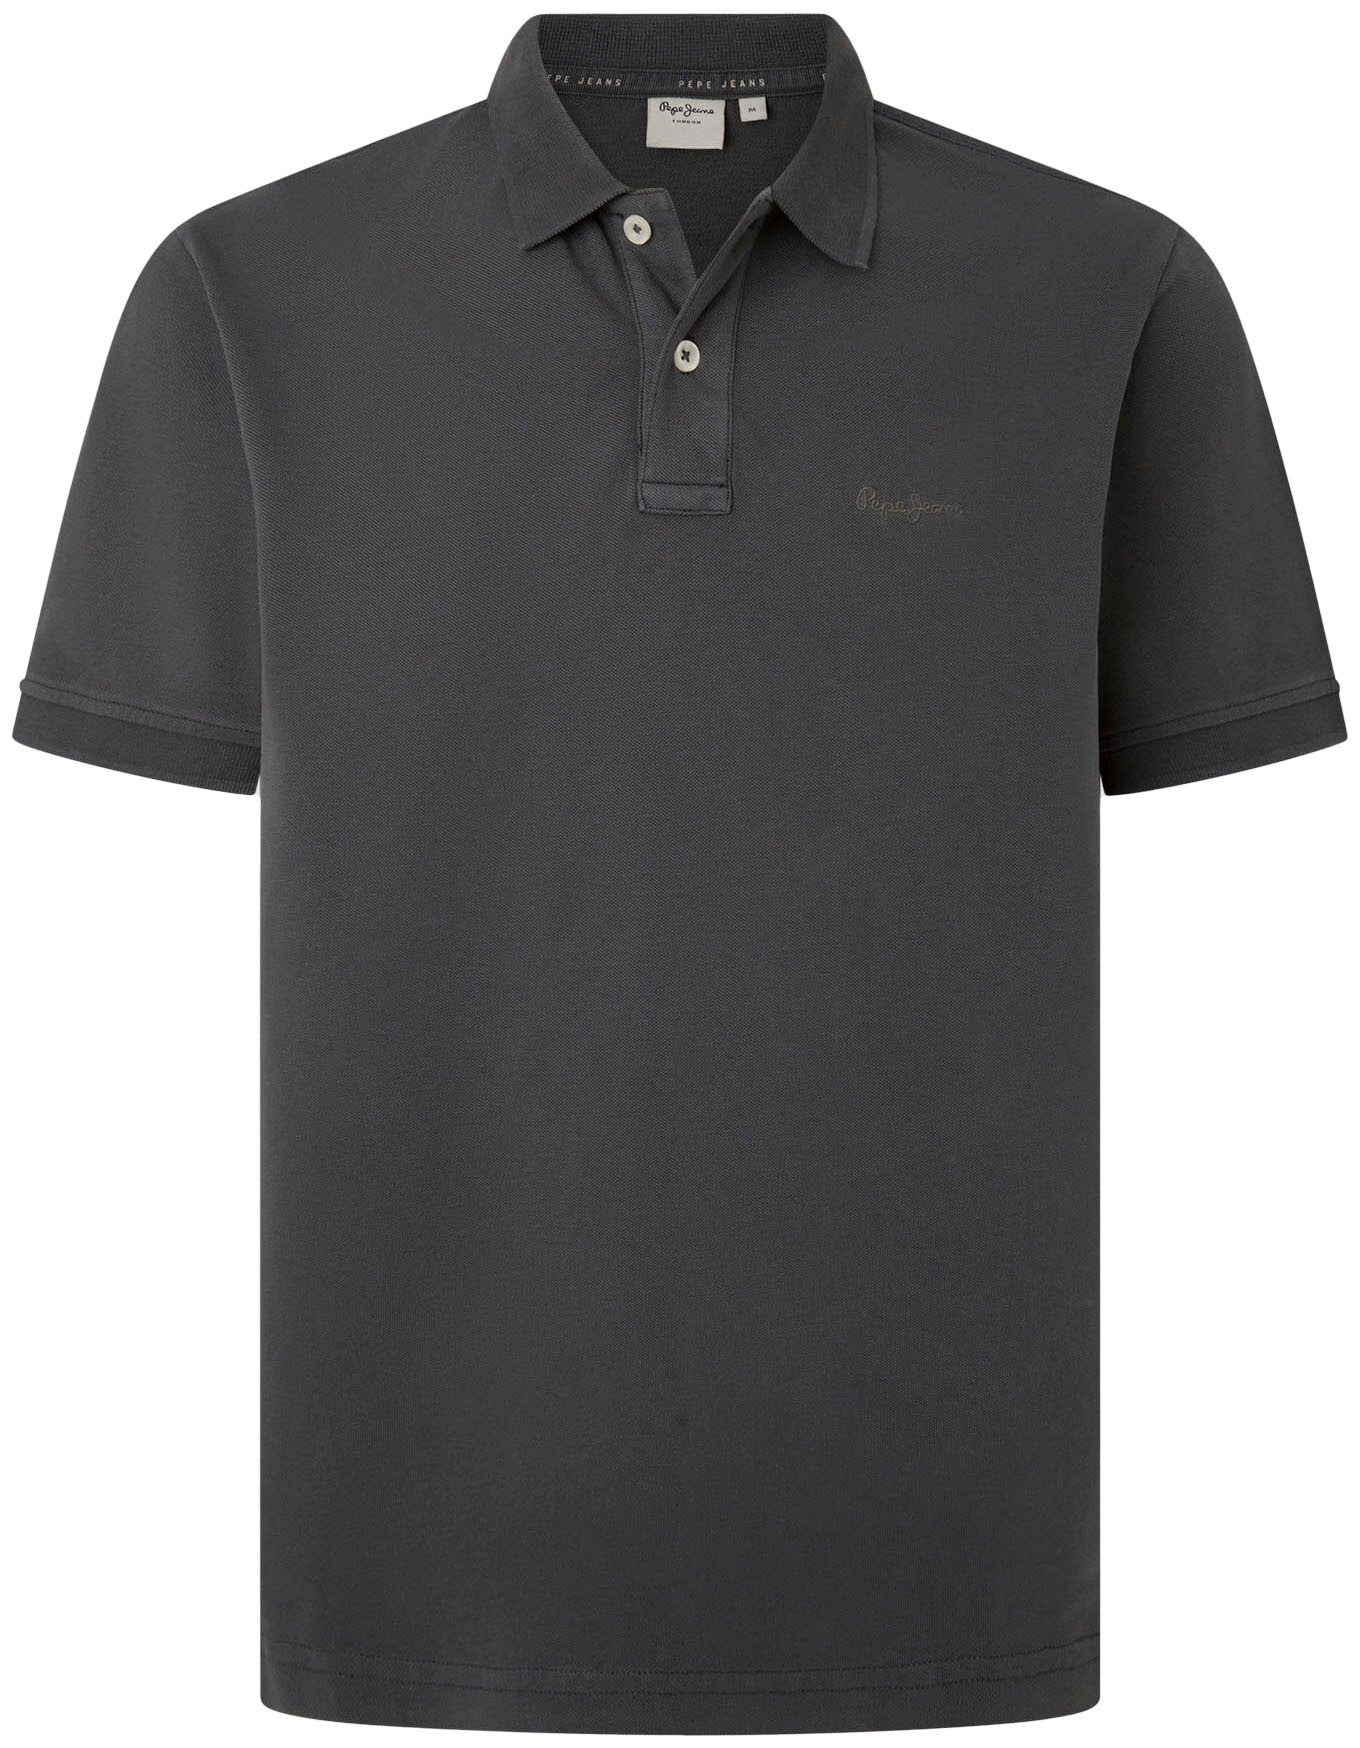 Pepe Jeans Poloshirt »Pepe Poloshirt NEW OLIVER GD« von Pepe Jeans